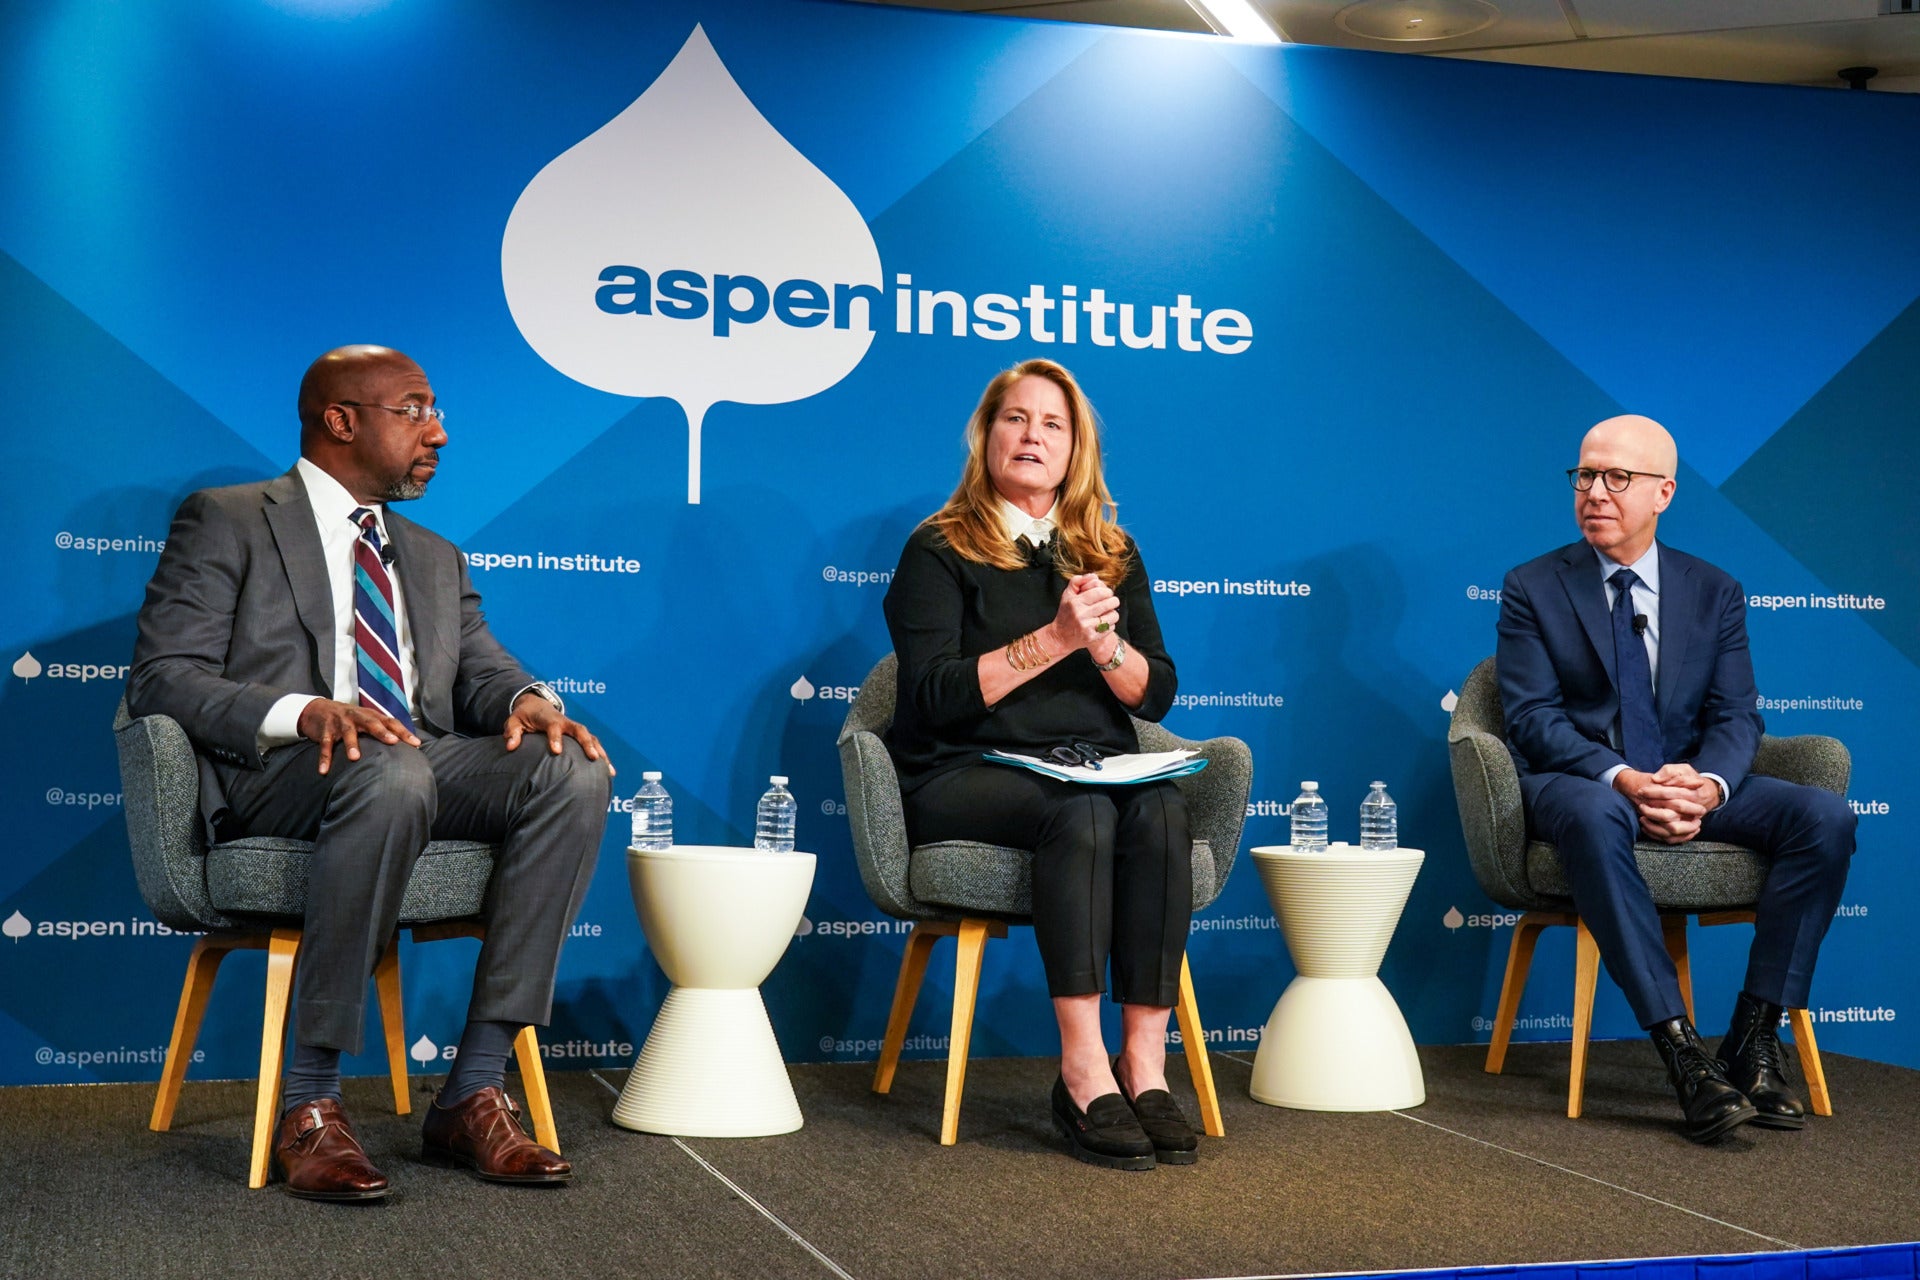 Three panelists are seated on a stage with white tables between them and water bottles on the tables. They are in front of a blue background with the Aspen Institute logo. On the left is Senator Ralph Warnock, a black man wearing a gray suit, white shirt, and colorful tie. In the middle is the Aspen Institute's Anne Mosle, a white woman with long blonde hair wearing a sweater and white collared shirt. To her right is the final panelist, author Jonathan Eig - a bald white man with glasses who is wearing a dark blue suit and tie.